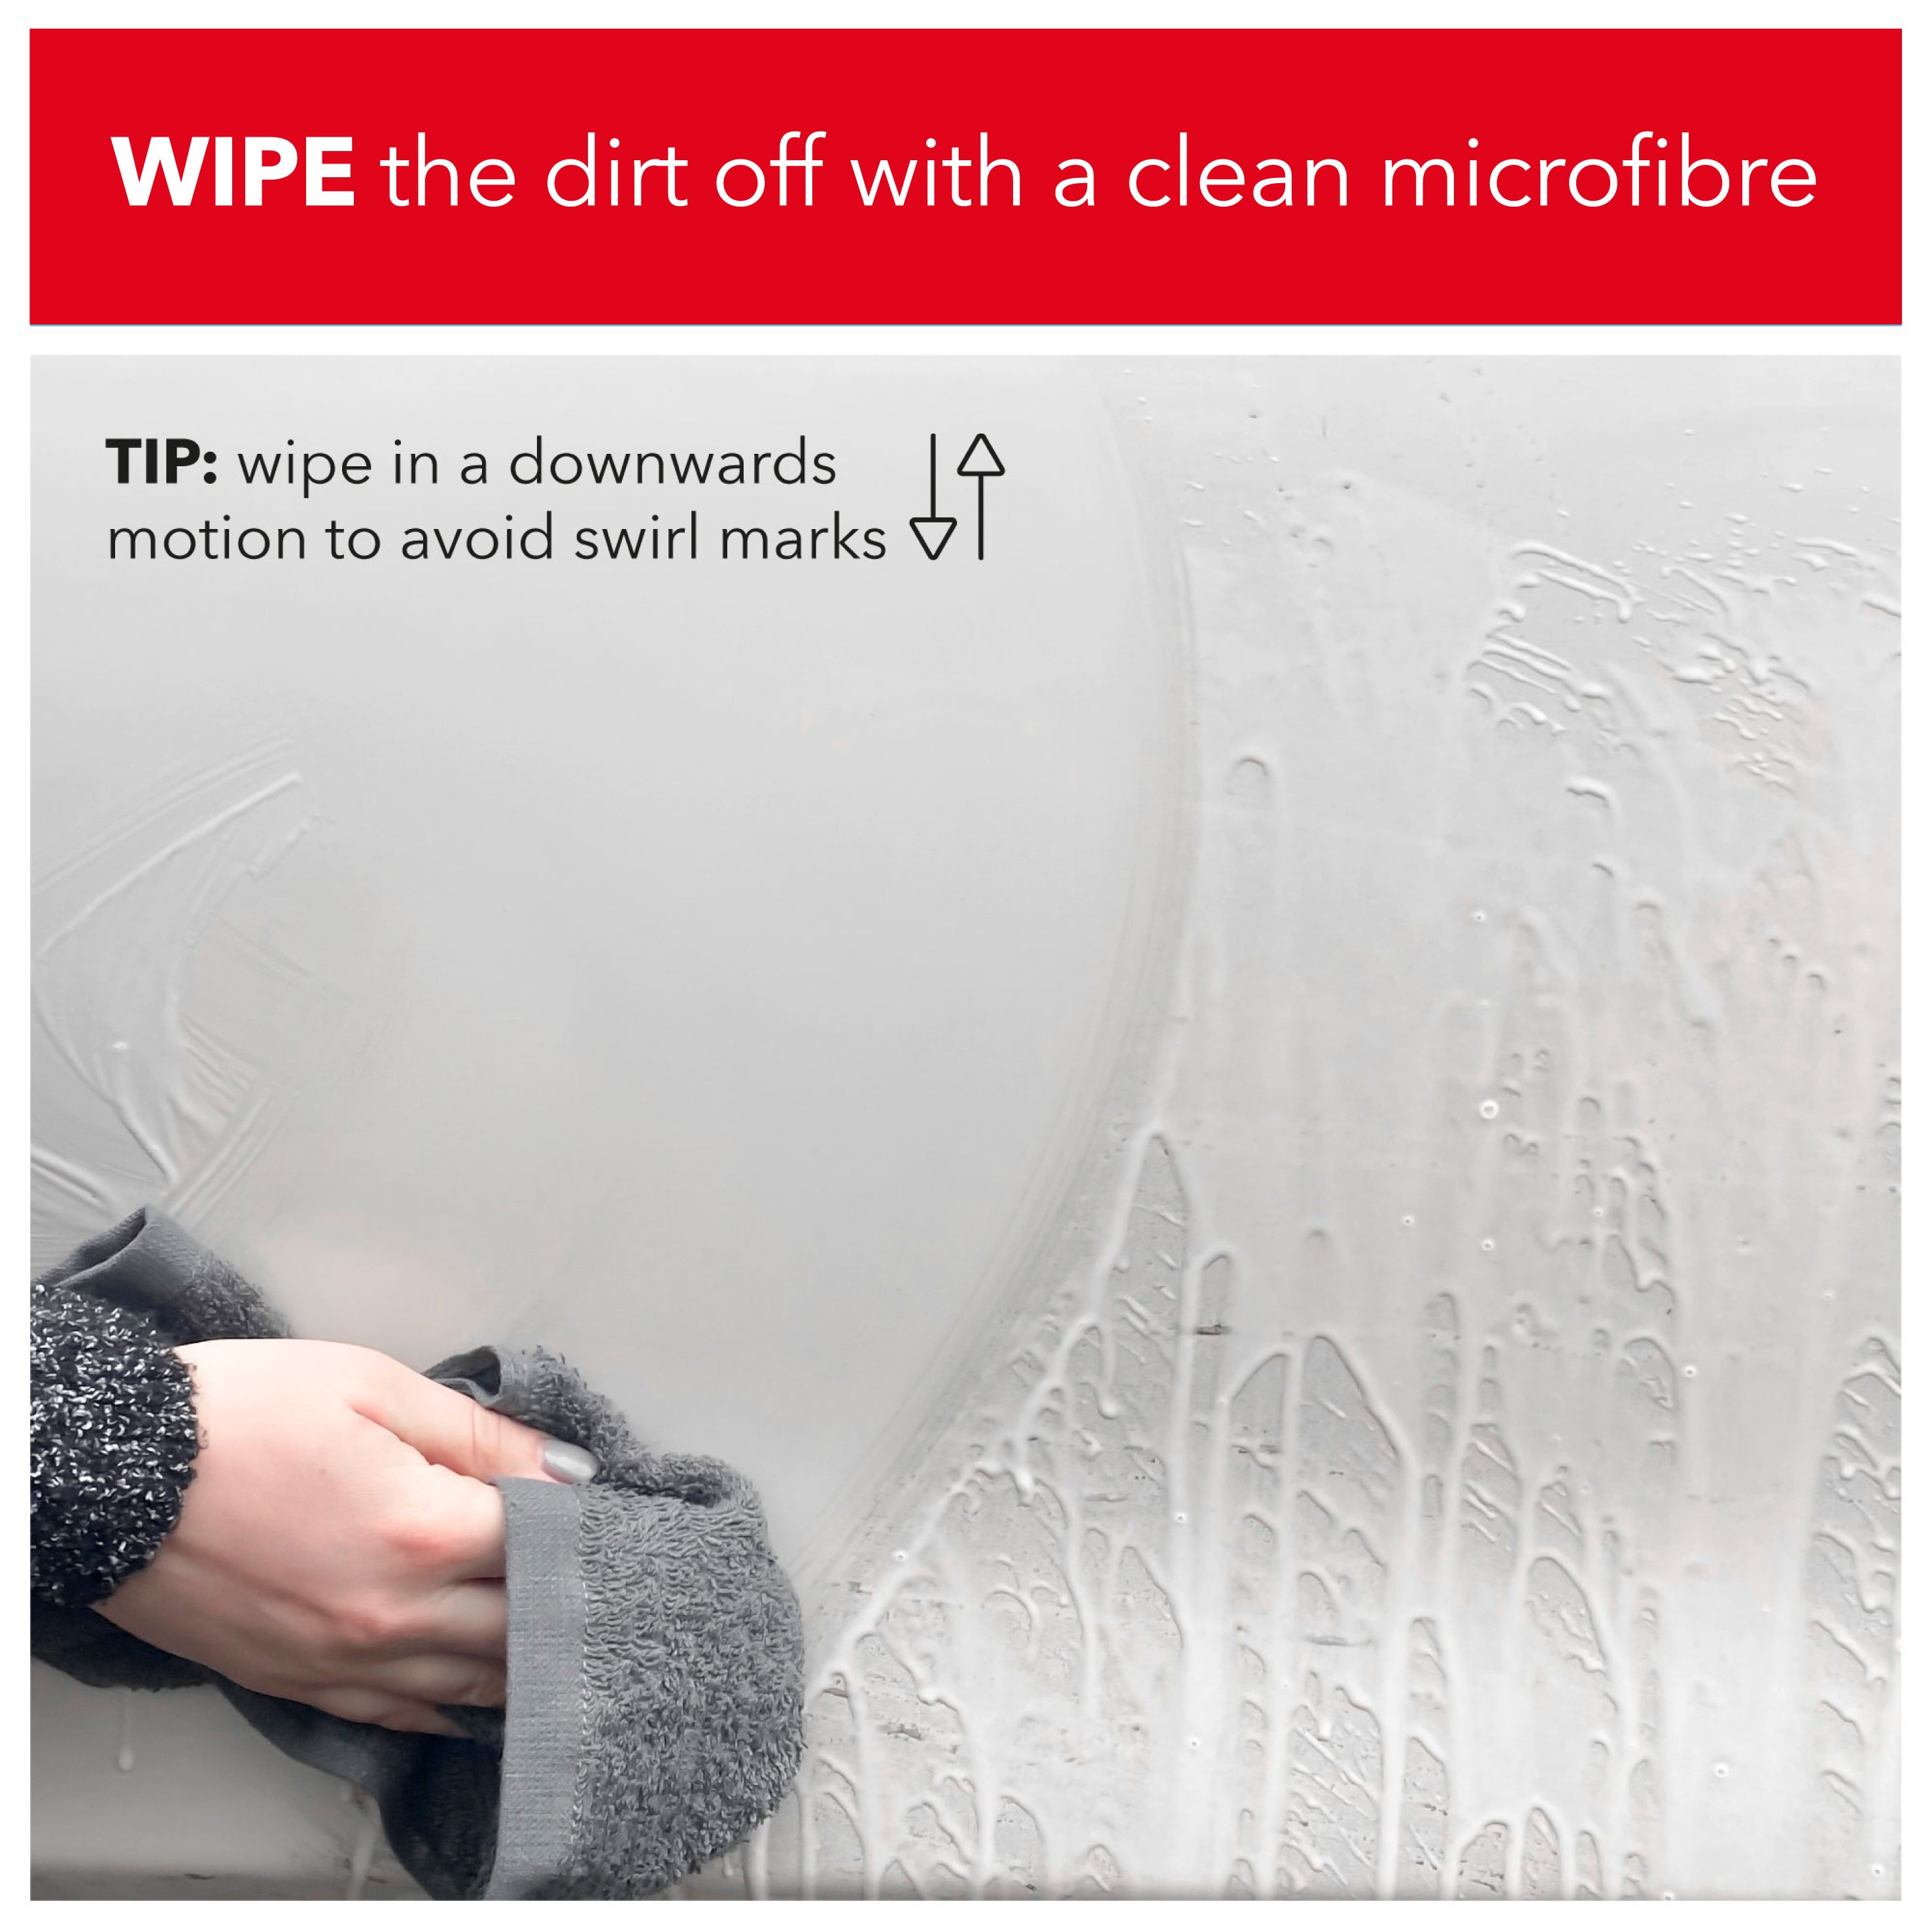 wipe the dirt off with a clean microfibre